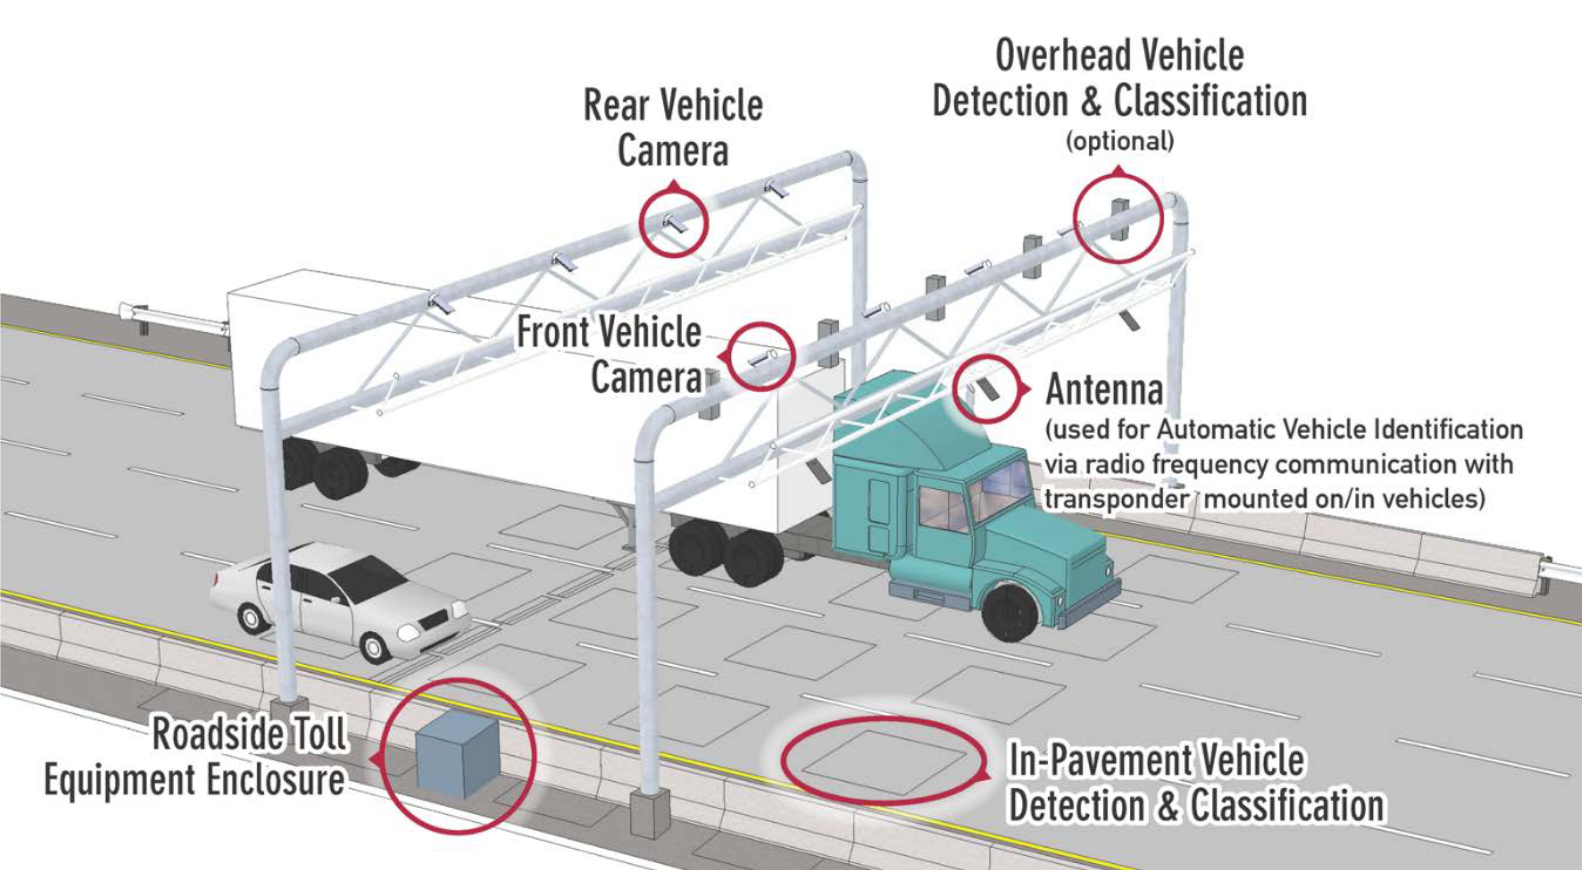 As shown in the figure, the overhead cameras, antennae and associated equipment are typically mounted on gantries that span the width of the roadway, while the inductance loops are embedded in the pavement and centered on the travel lanes. 